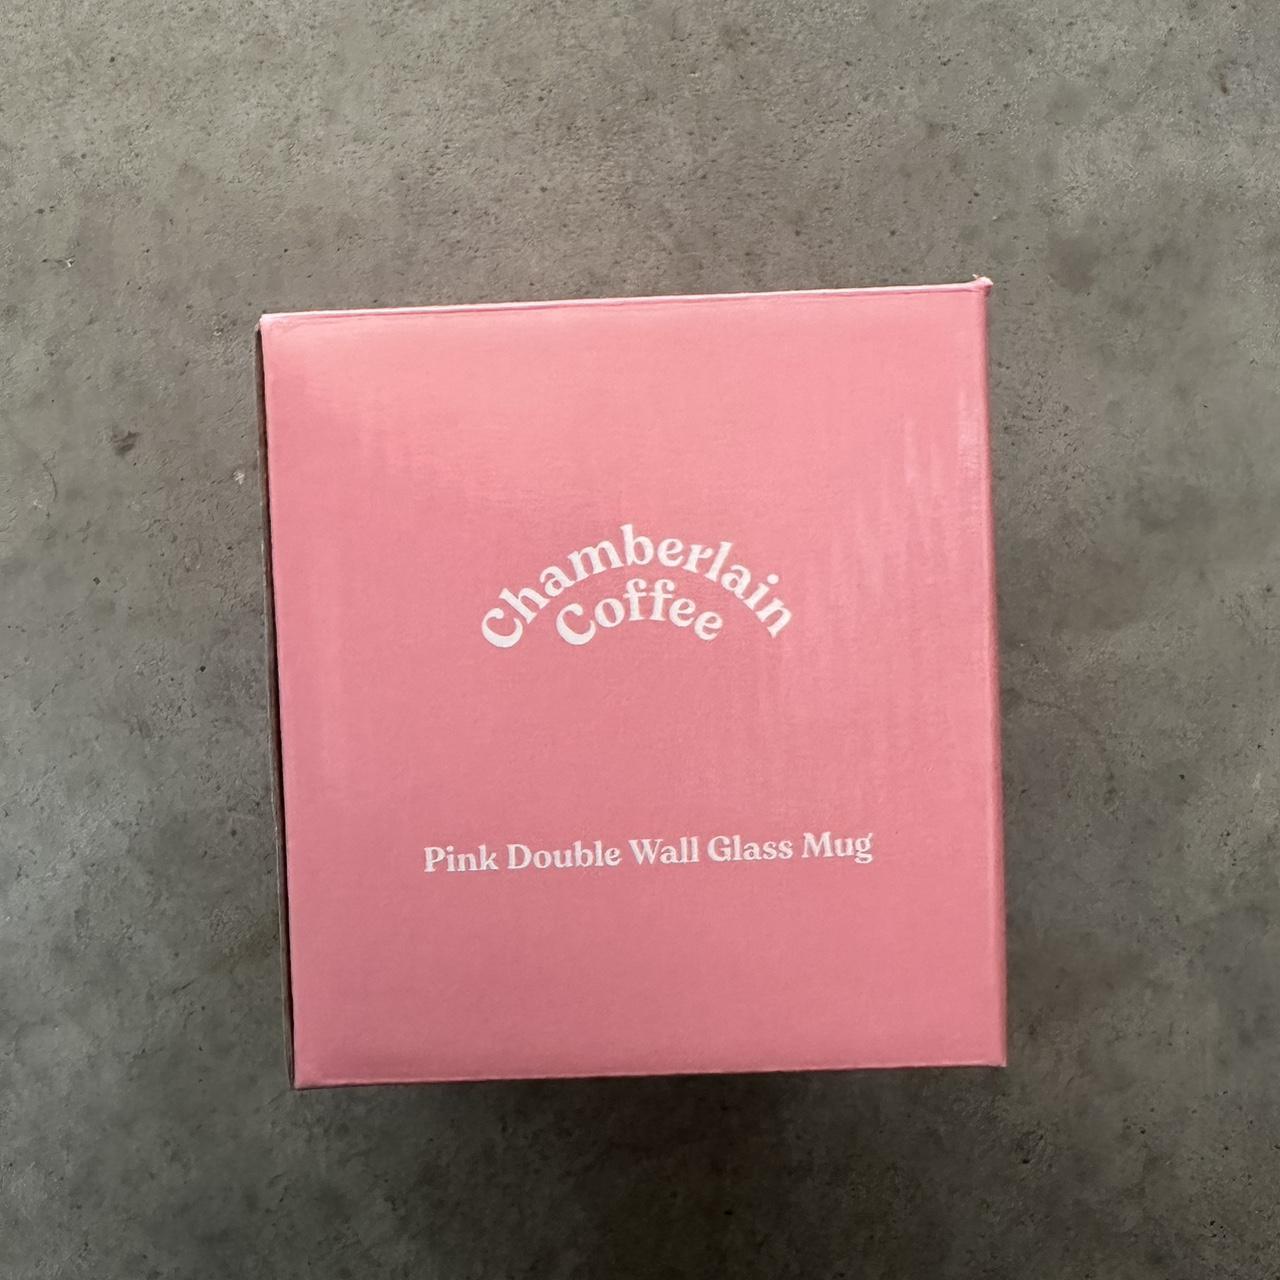 Chamberlain Coffee Pink Double Walled Mug Limited Edition Release Sold Out